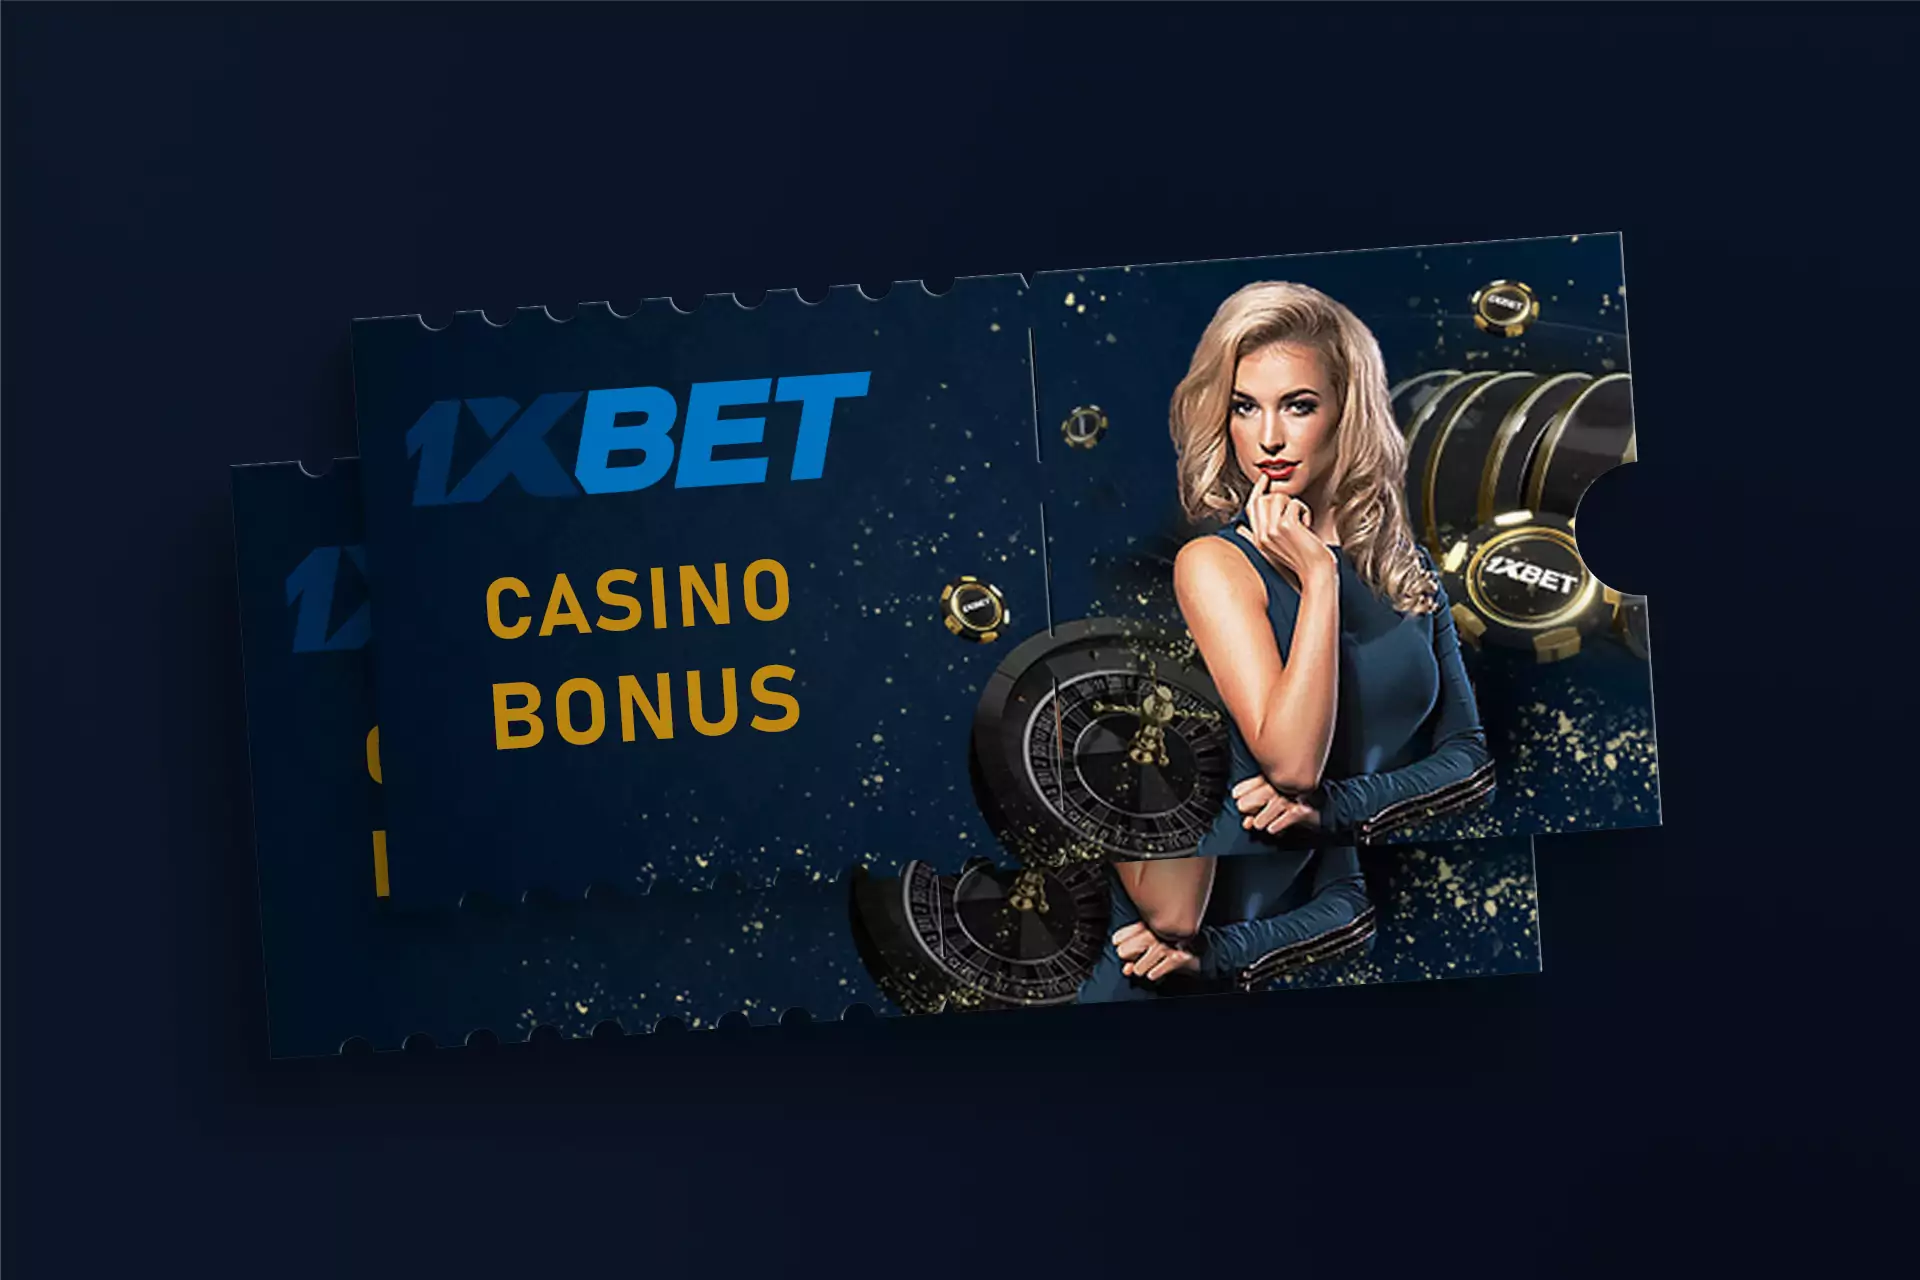 You can use the casino bonus playing games or slots.